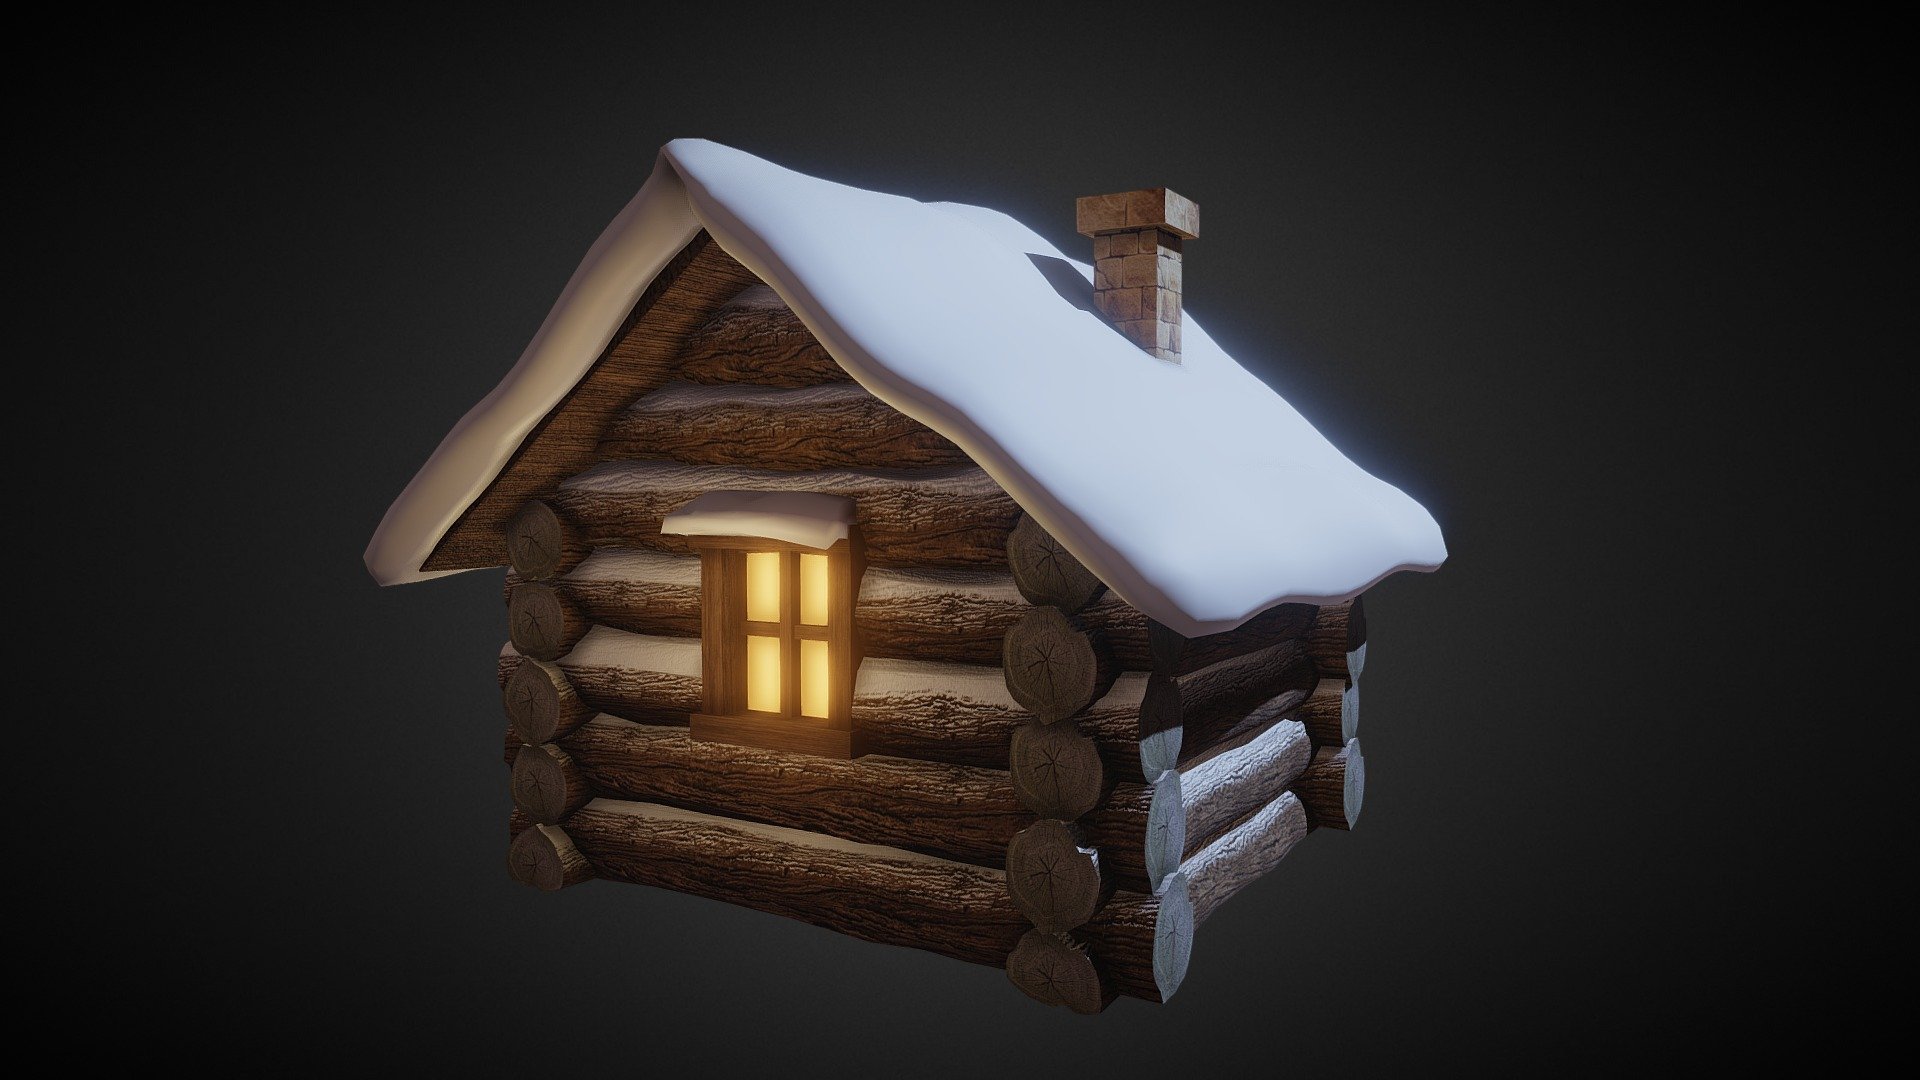 Low poly 3D model of a snow-covered wooden hut.
Made in Blender 2.82 Eevee - Snowy Wooden Hut - Download Free 3D model by gecko0307 3d model